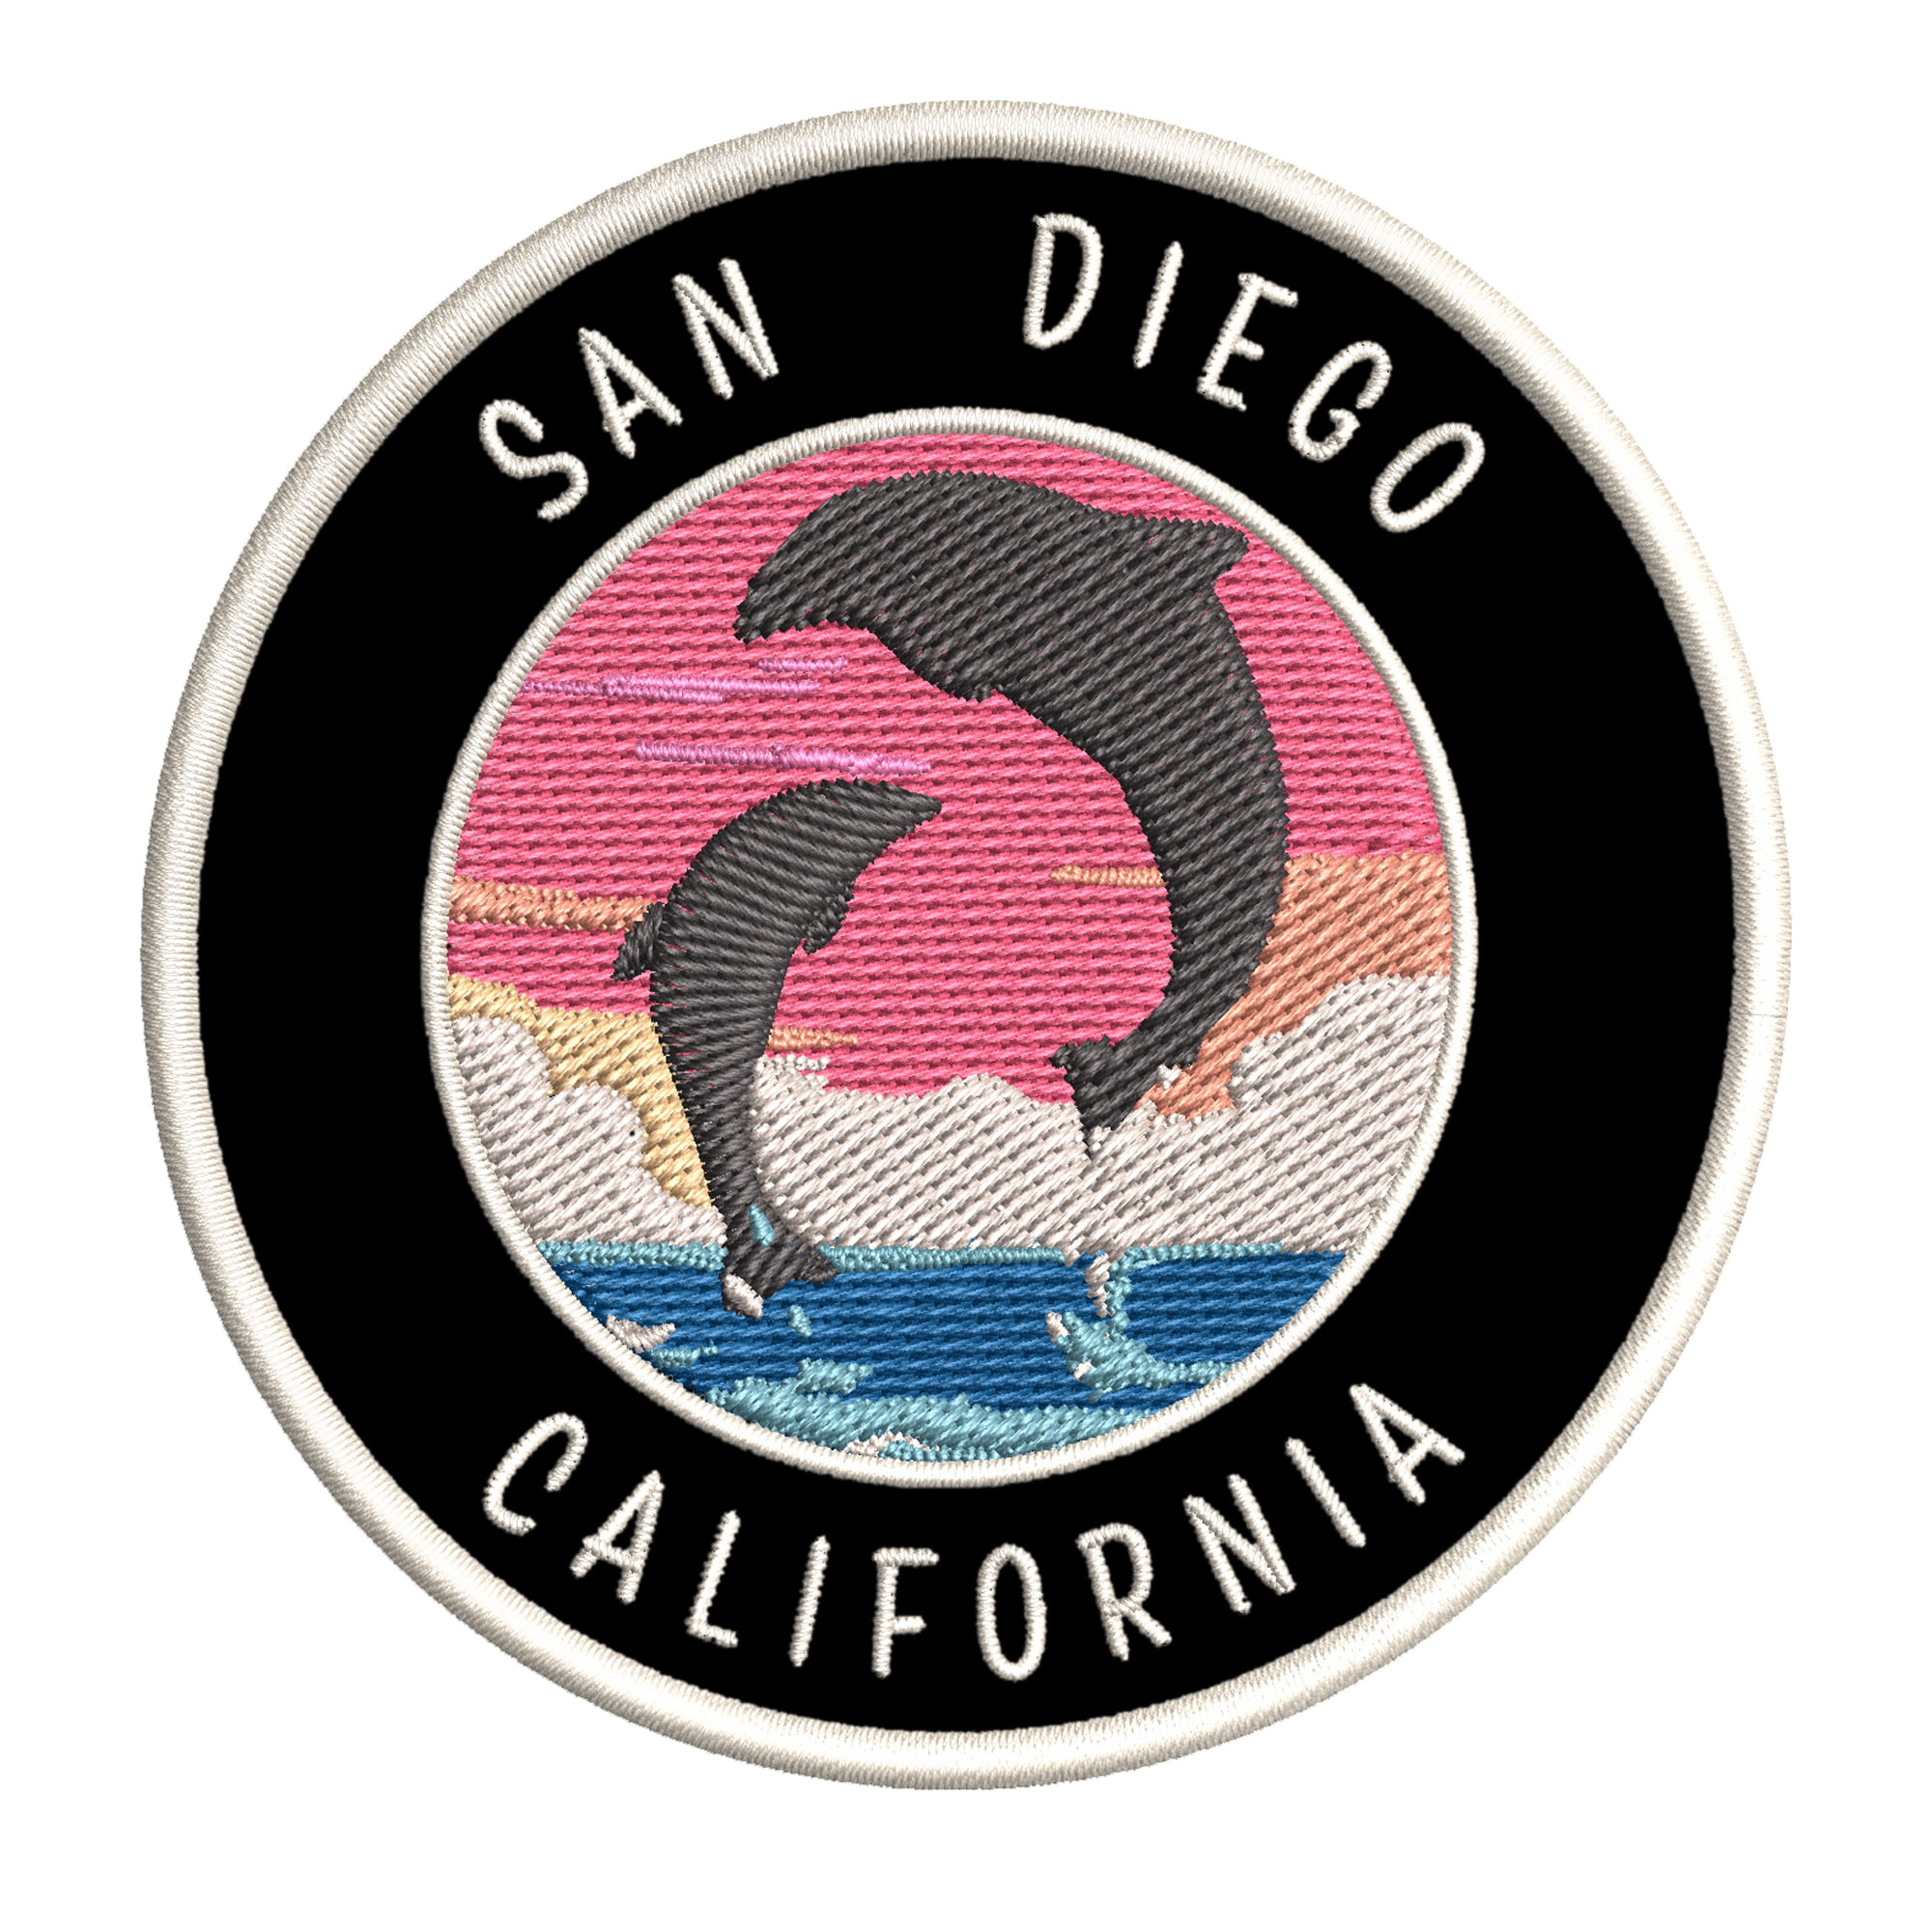 Iron or Sew-on Patch Dolphins 3.5 Inch Embroidered Fabric Badge Souvenir Ocean Theme San Diego California